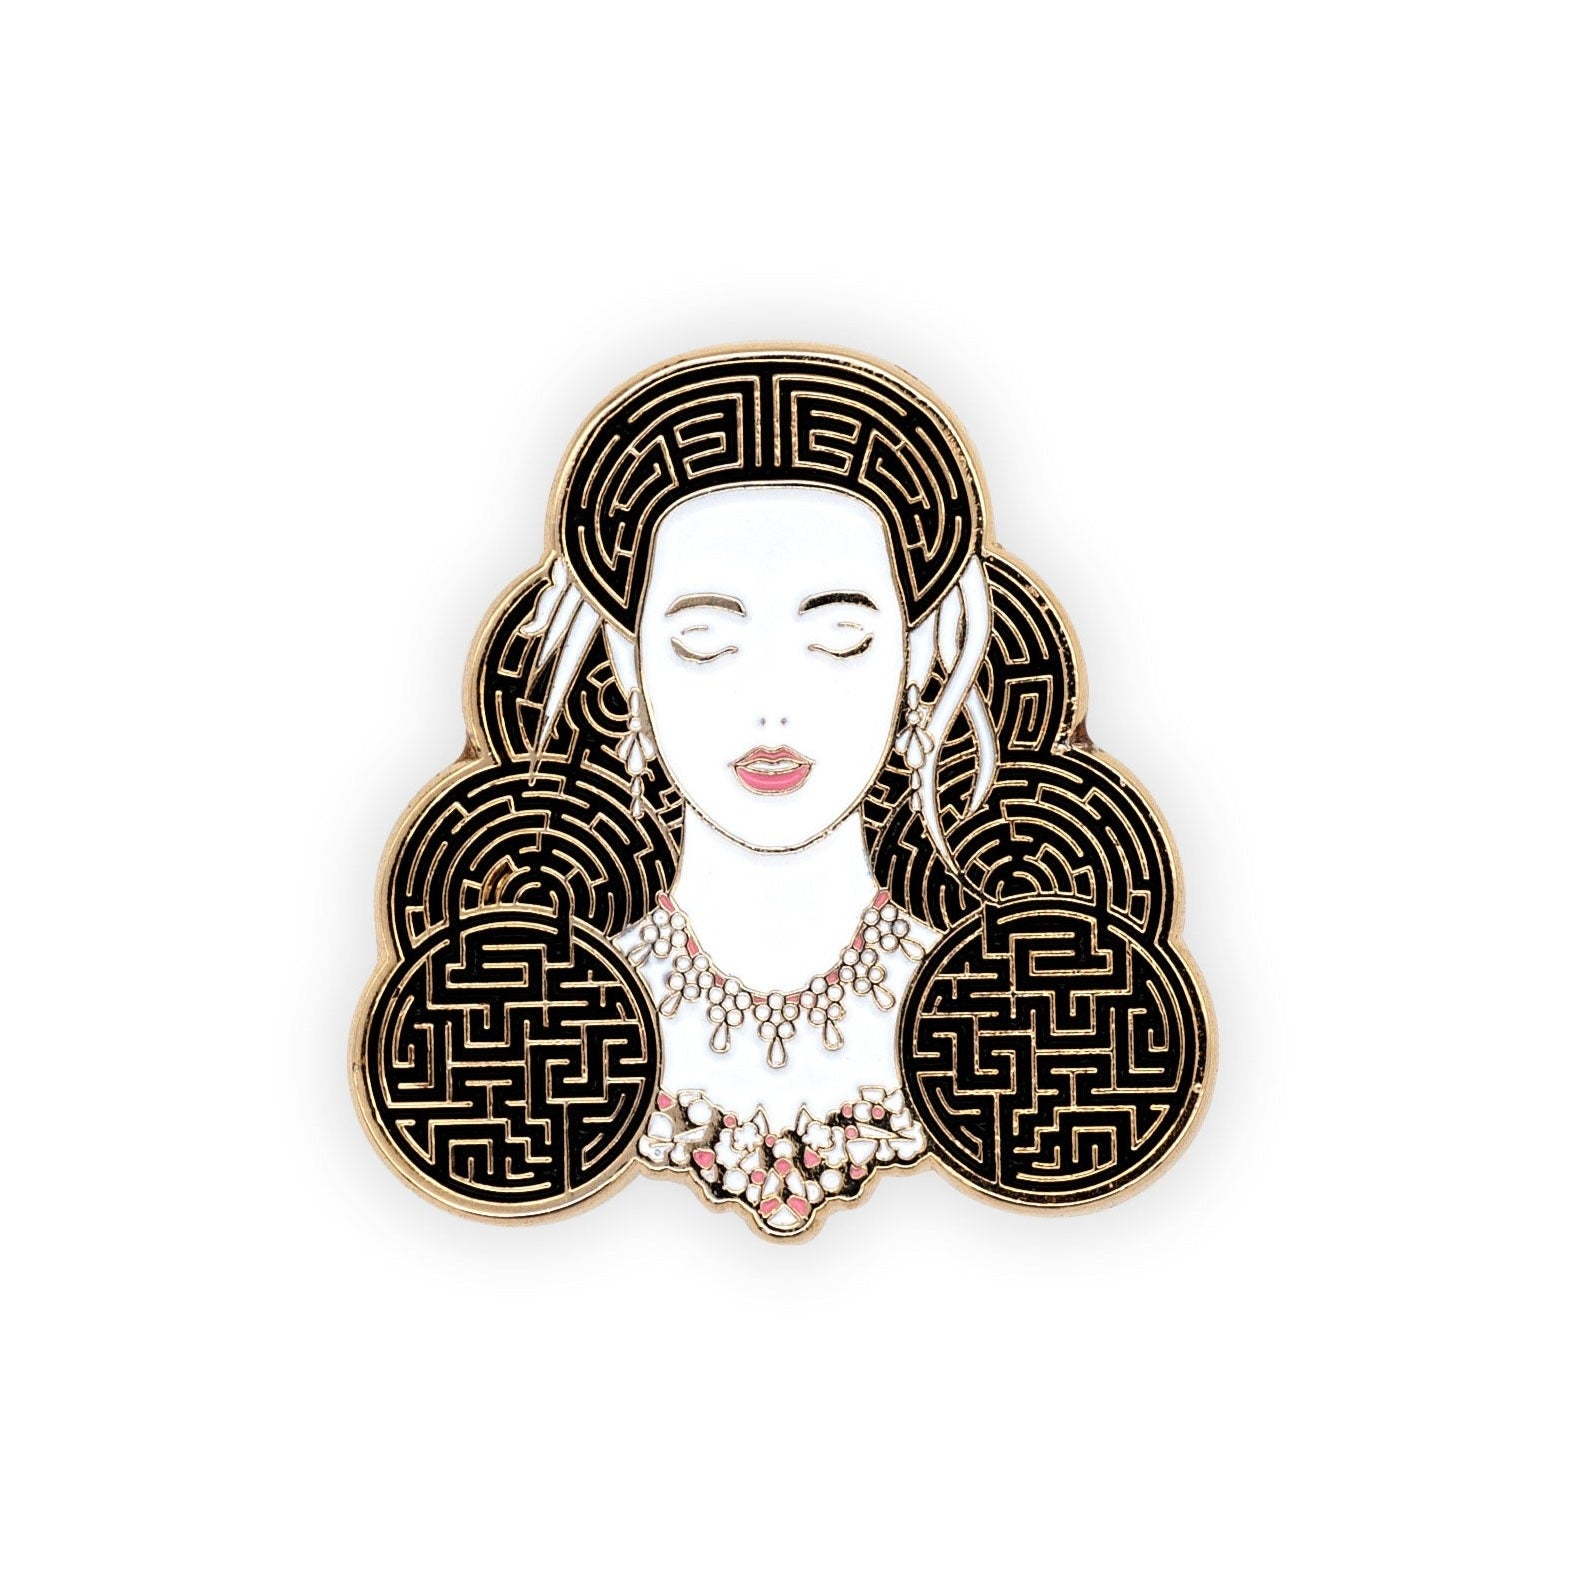 sarah lapel pin. a very clean illustration of sarah, with her eyes closed, and her hair done like in the ballroom scene, with feathers in it. but her hair also has the pattern of a labyrinth in it. pin is gold plated soft enamel. 